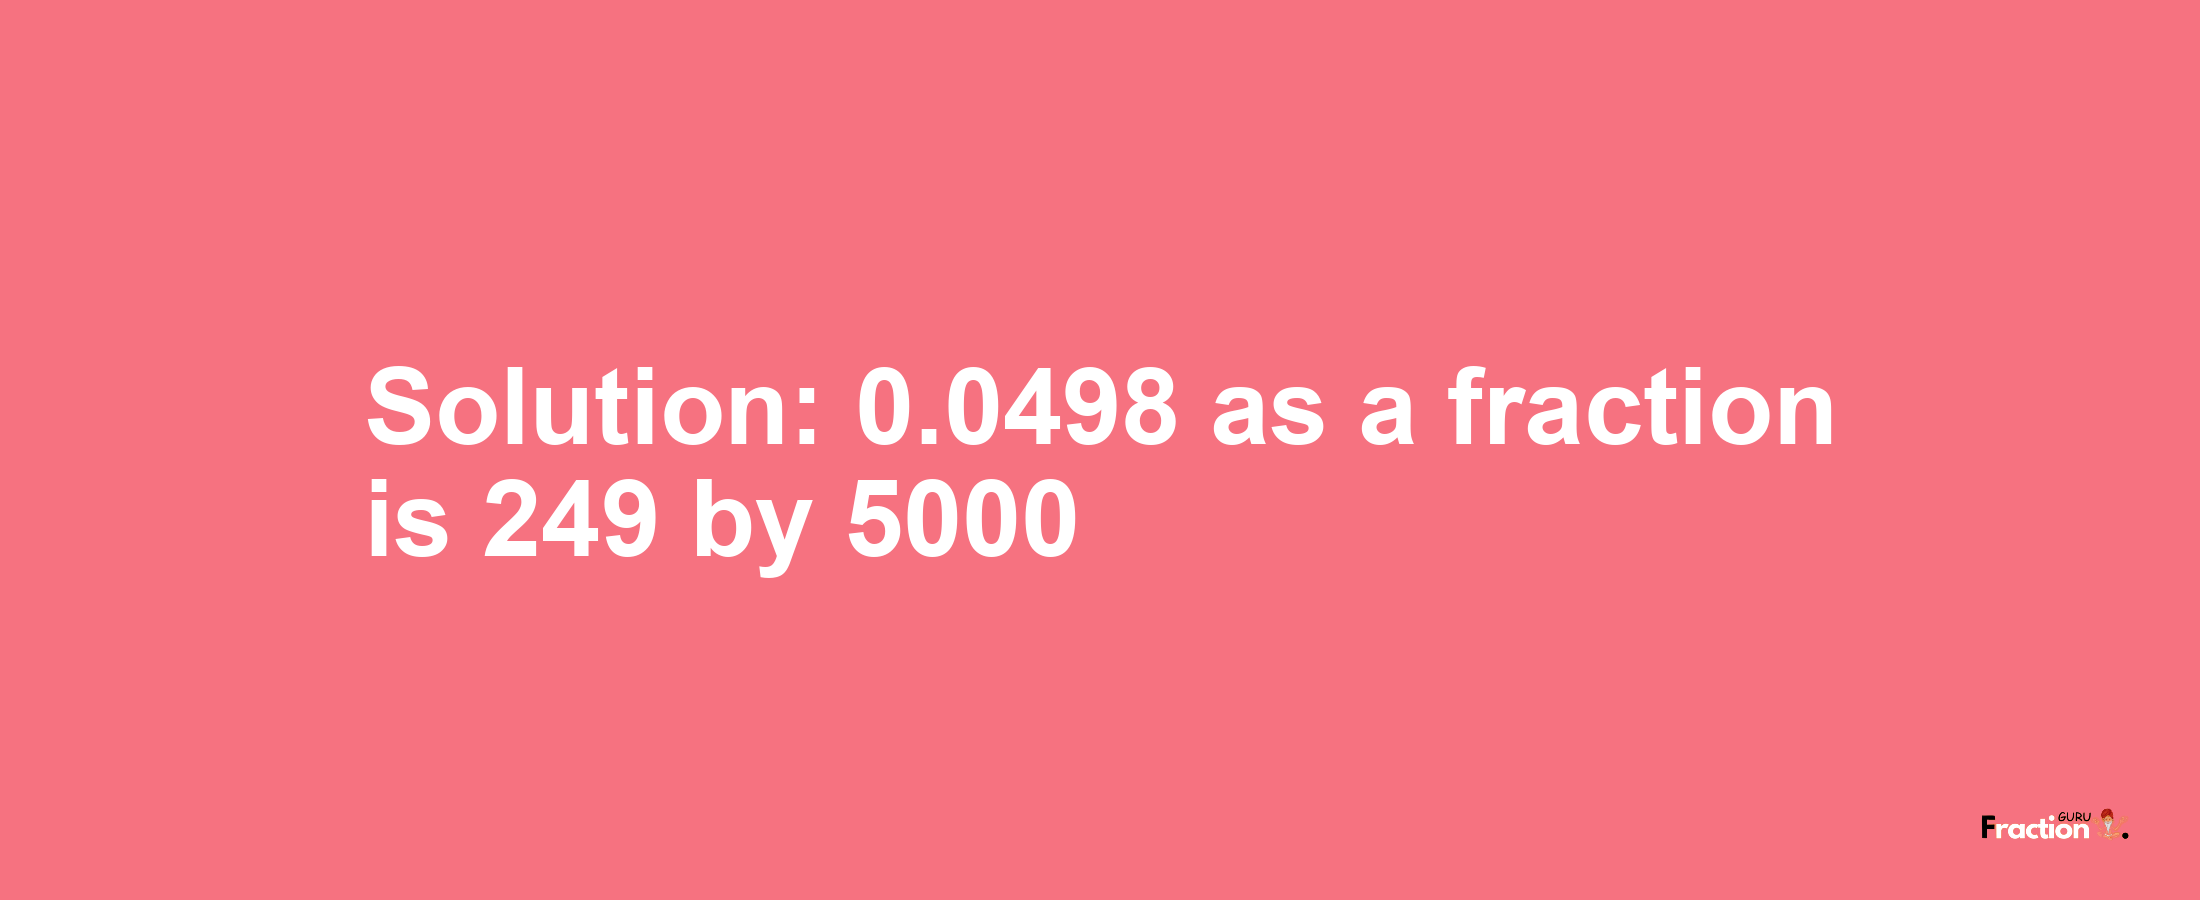 Solution:0.0498 as a fraction is 249/5000